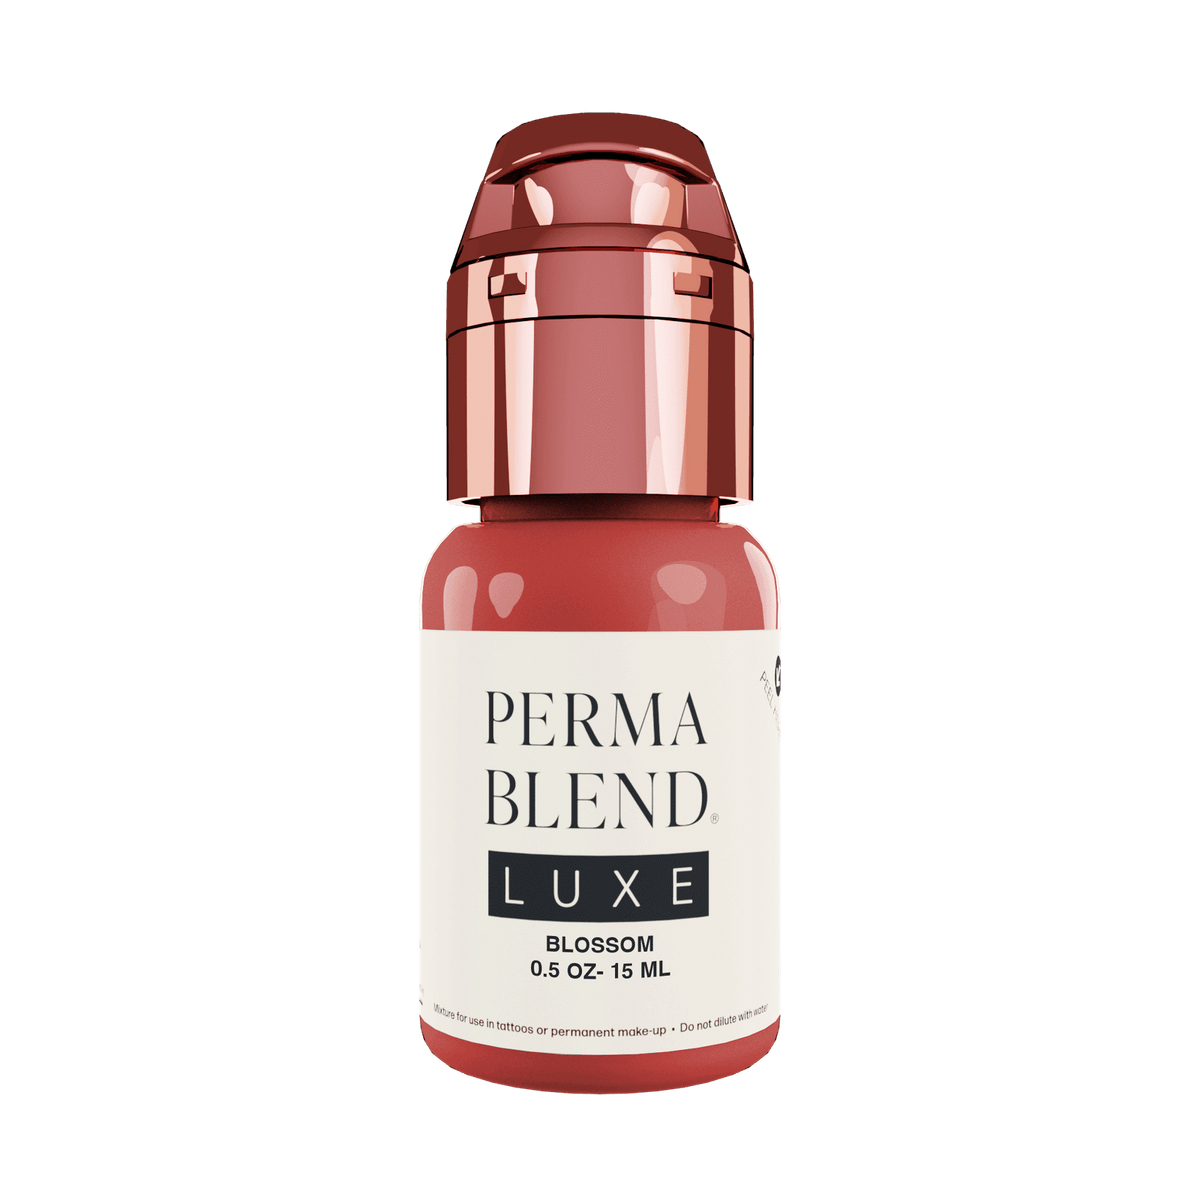 Perma Blend Luxe Blossom